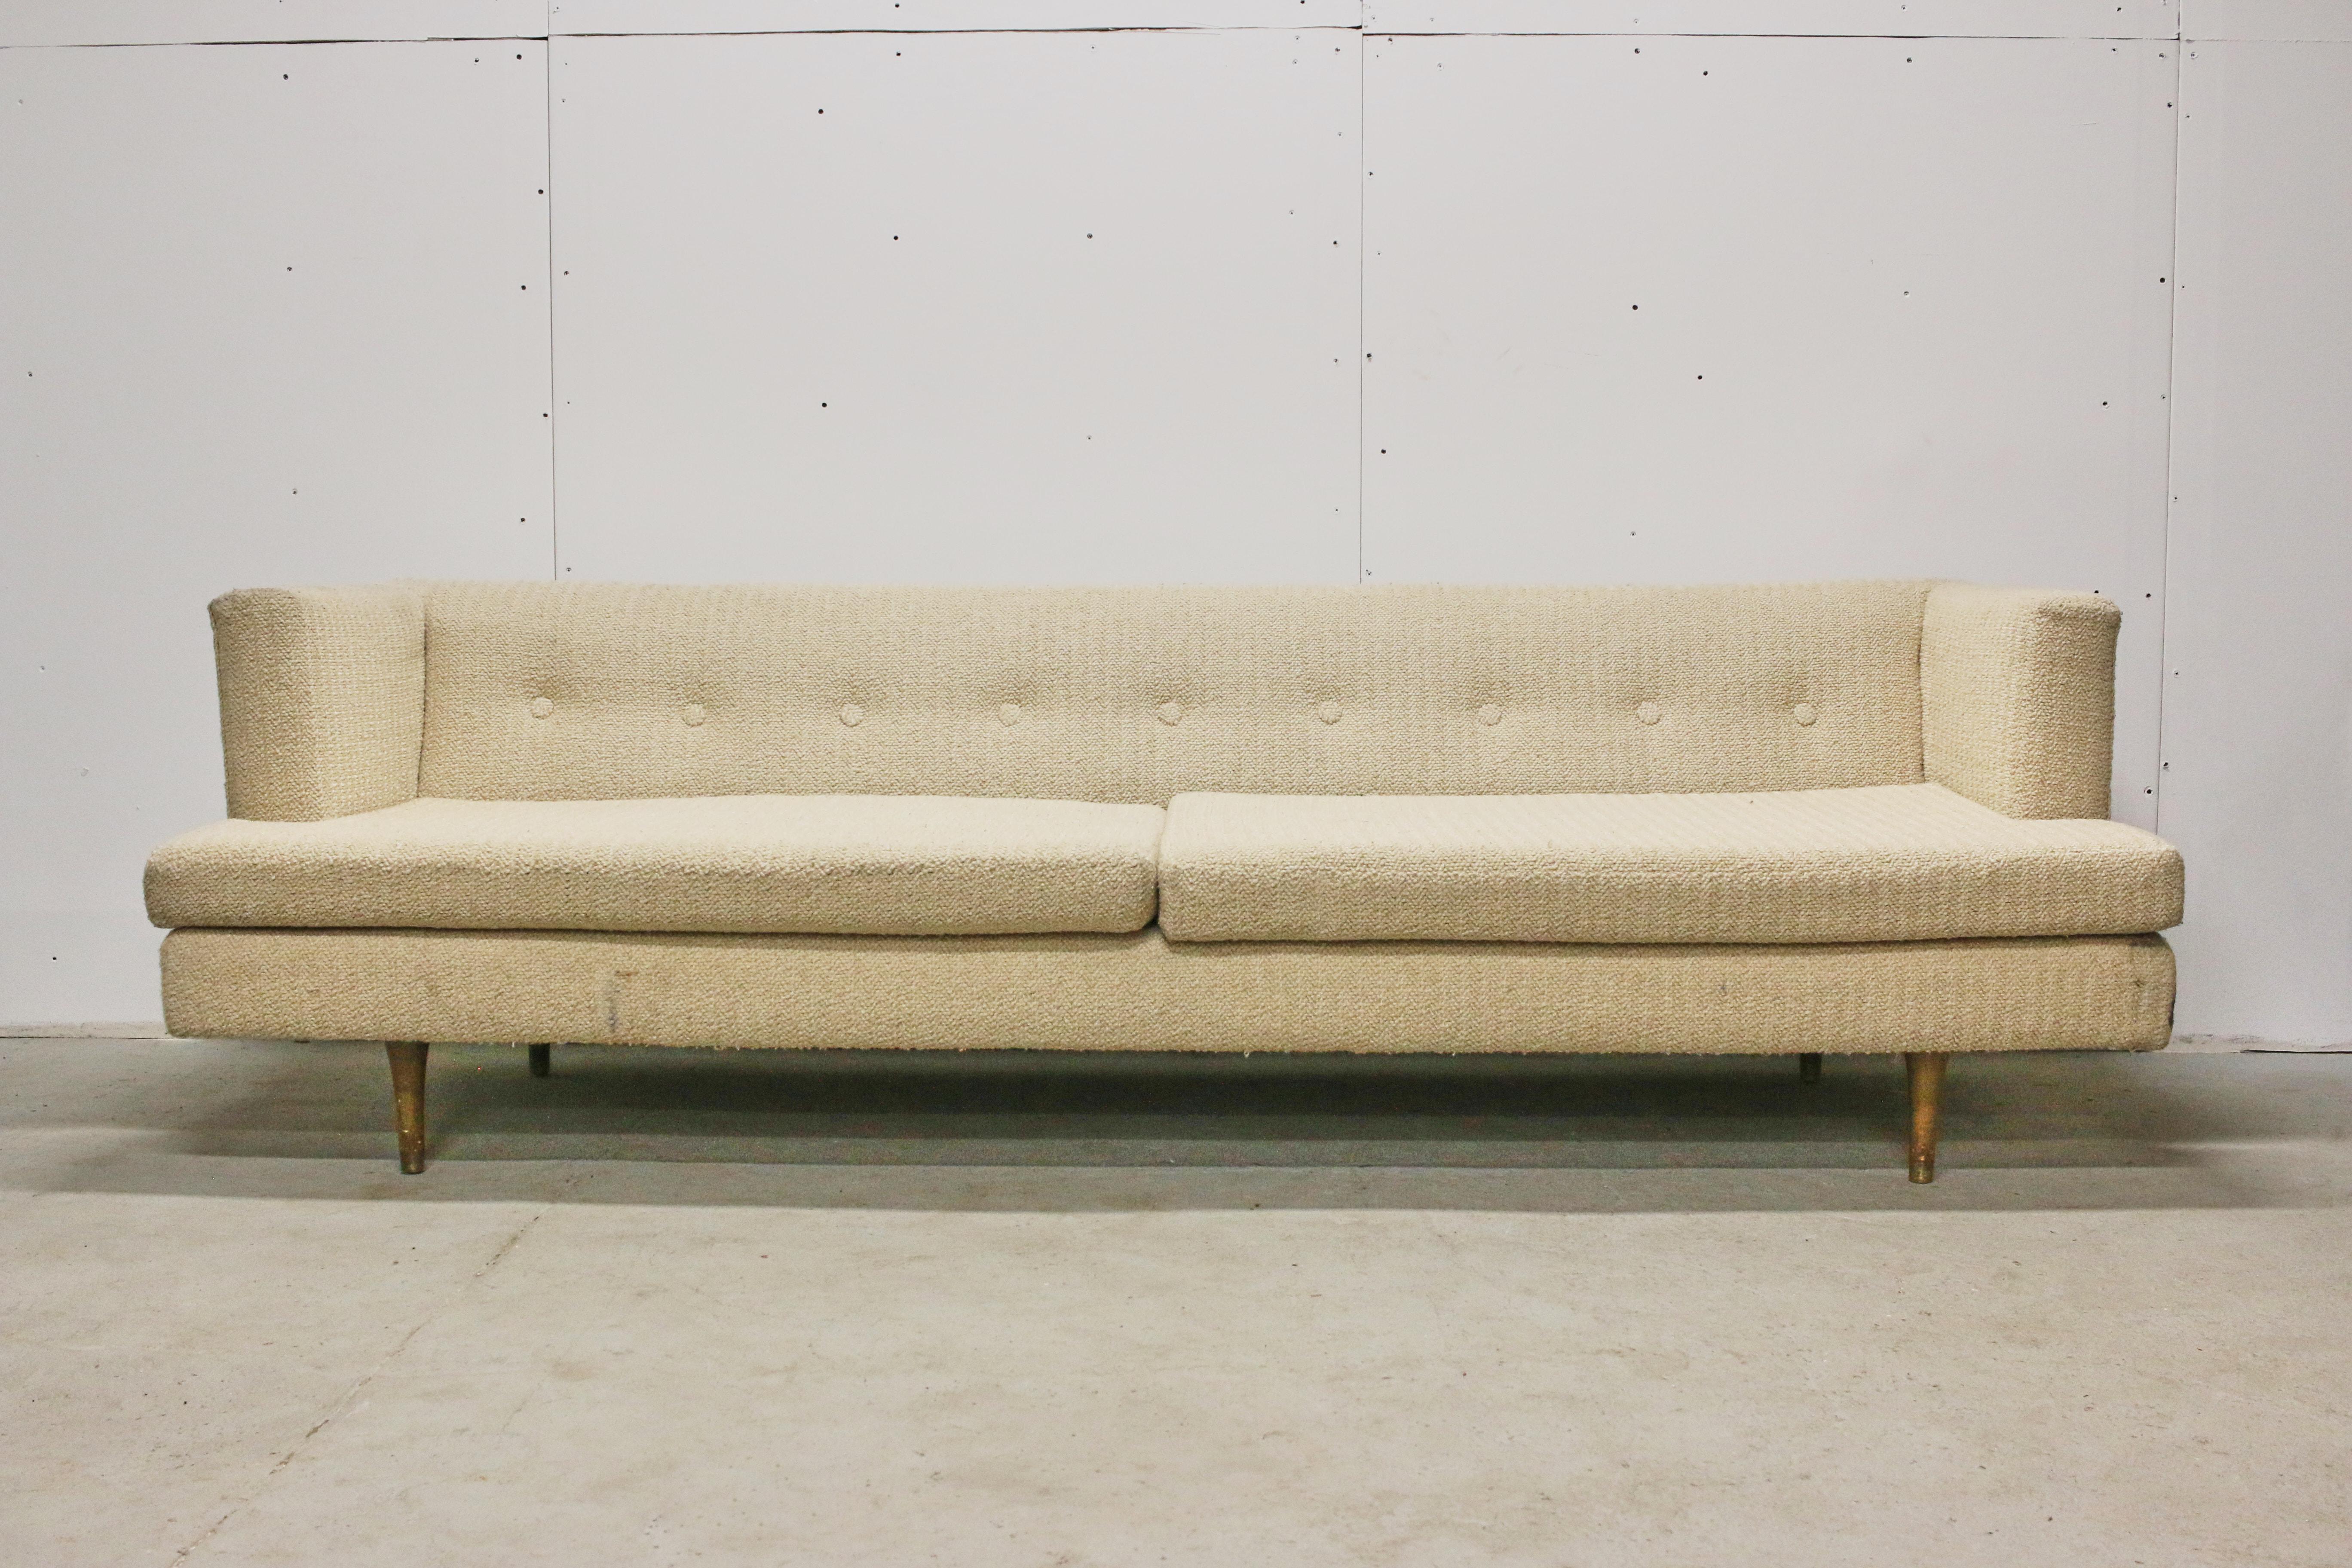 An original Edward Wormley even arm sofa, made by Dunbar, in the USA, 1950s. The fabric is dirty and would benefit from replacing, so this sofa is offered for recovering in the customers own choice of material.